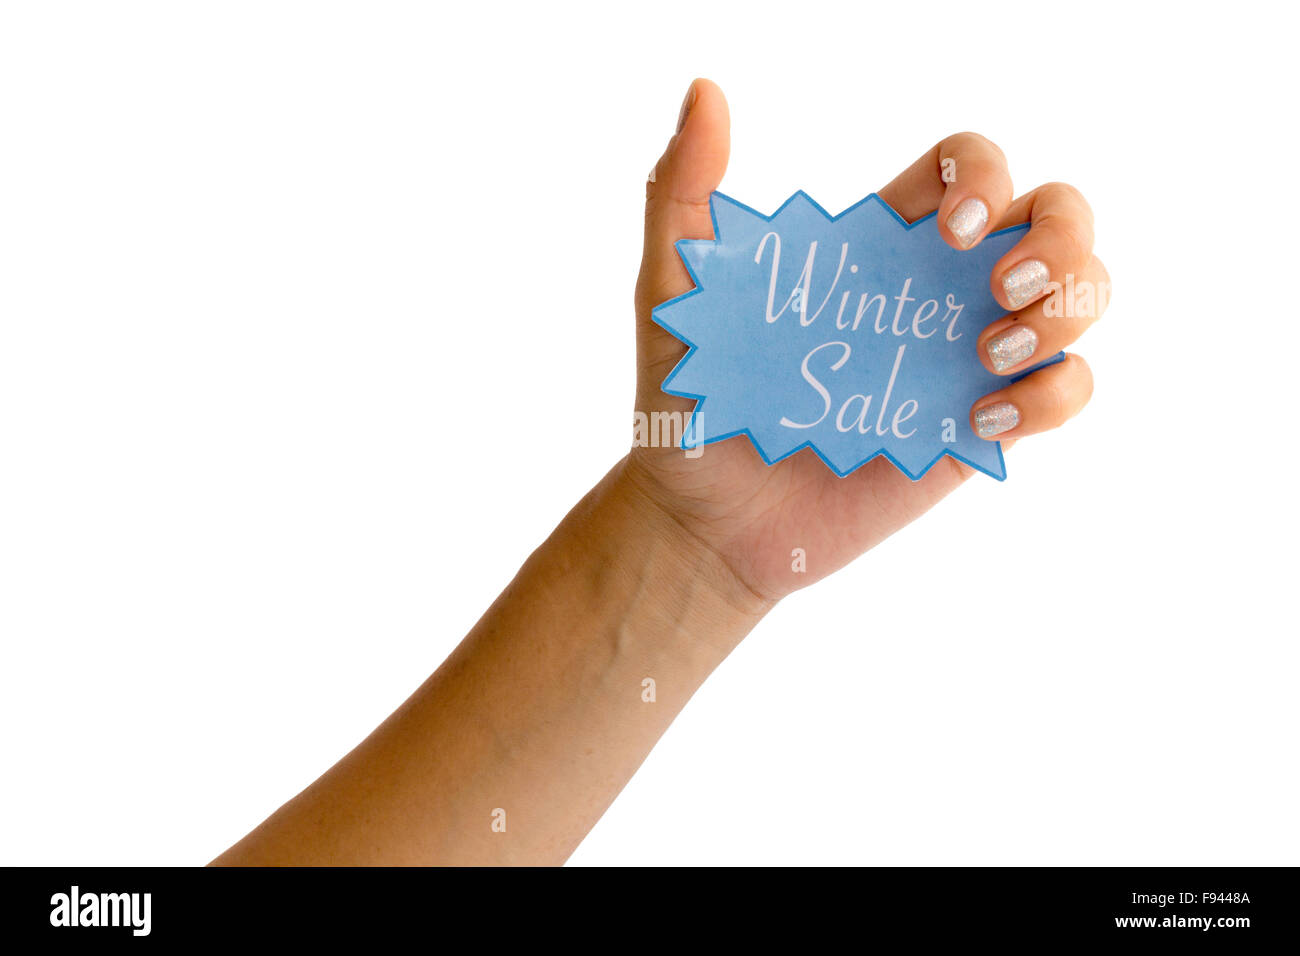 Woman's hand with silver fingernails holding a blue winter sale sign Stock Photo